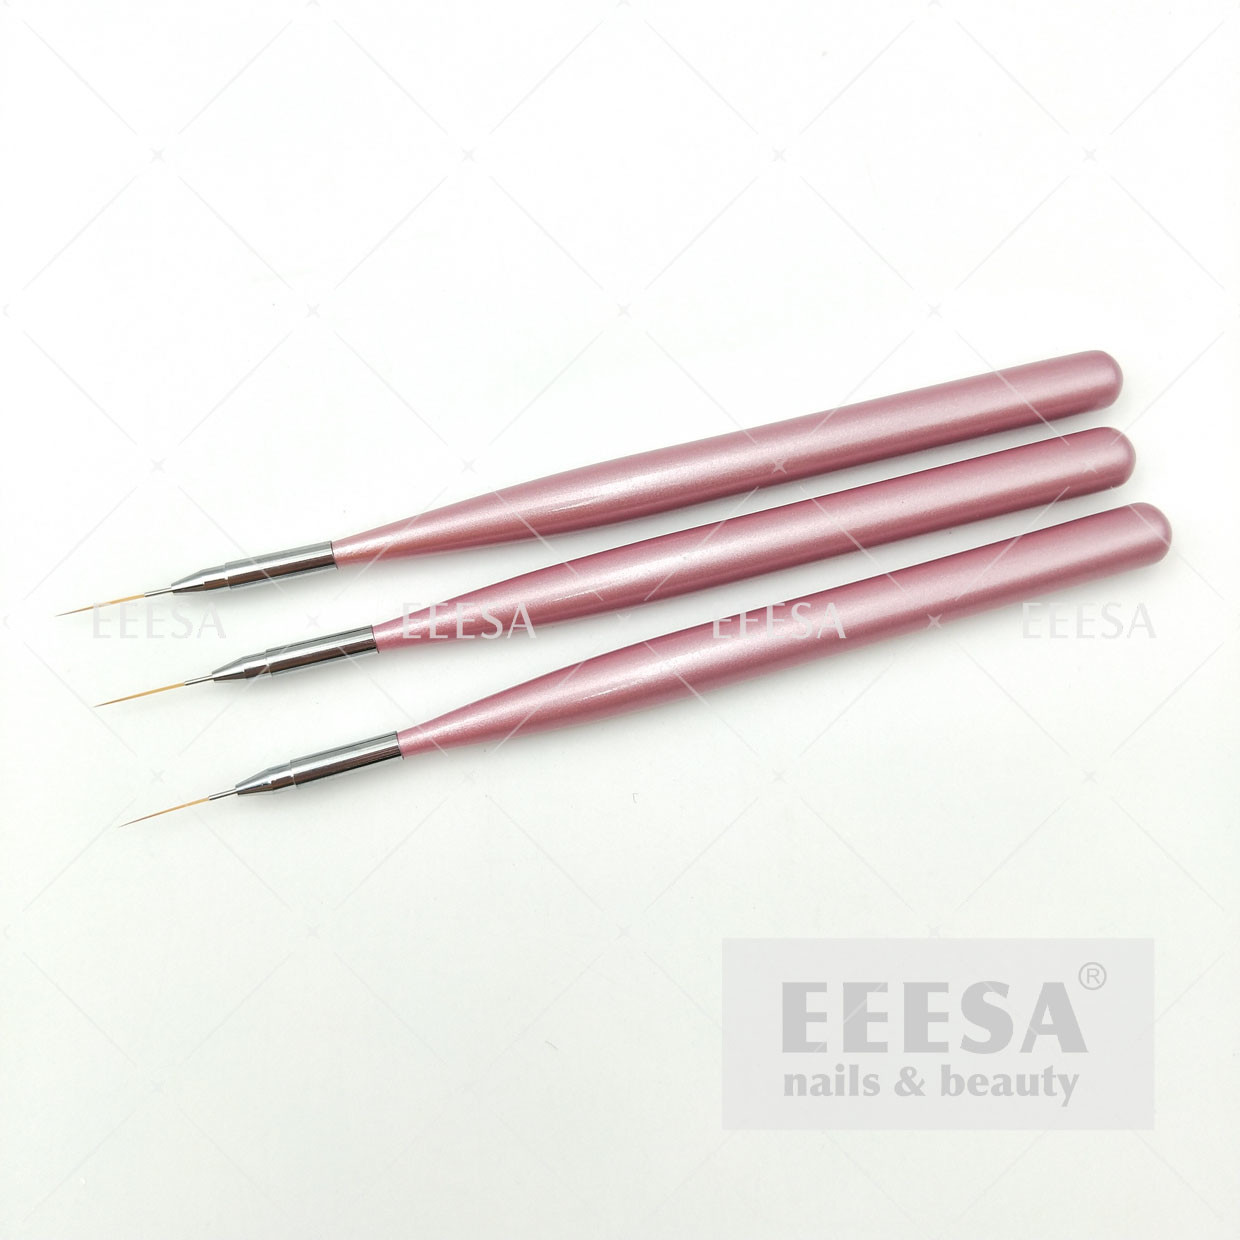  12Mm Length Wooden Pencil With Lid Wood Nail Art Long Liner Brush Manufactures